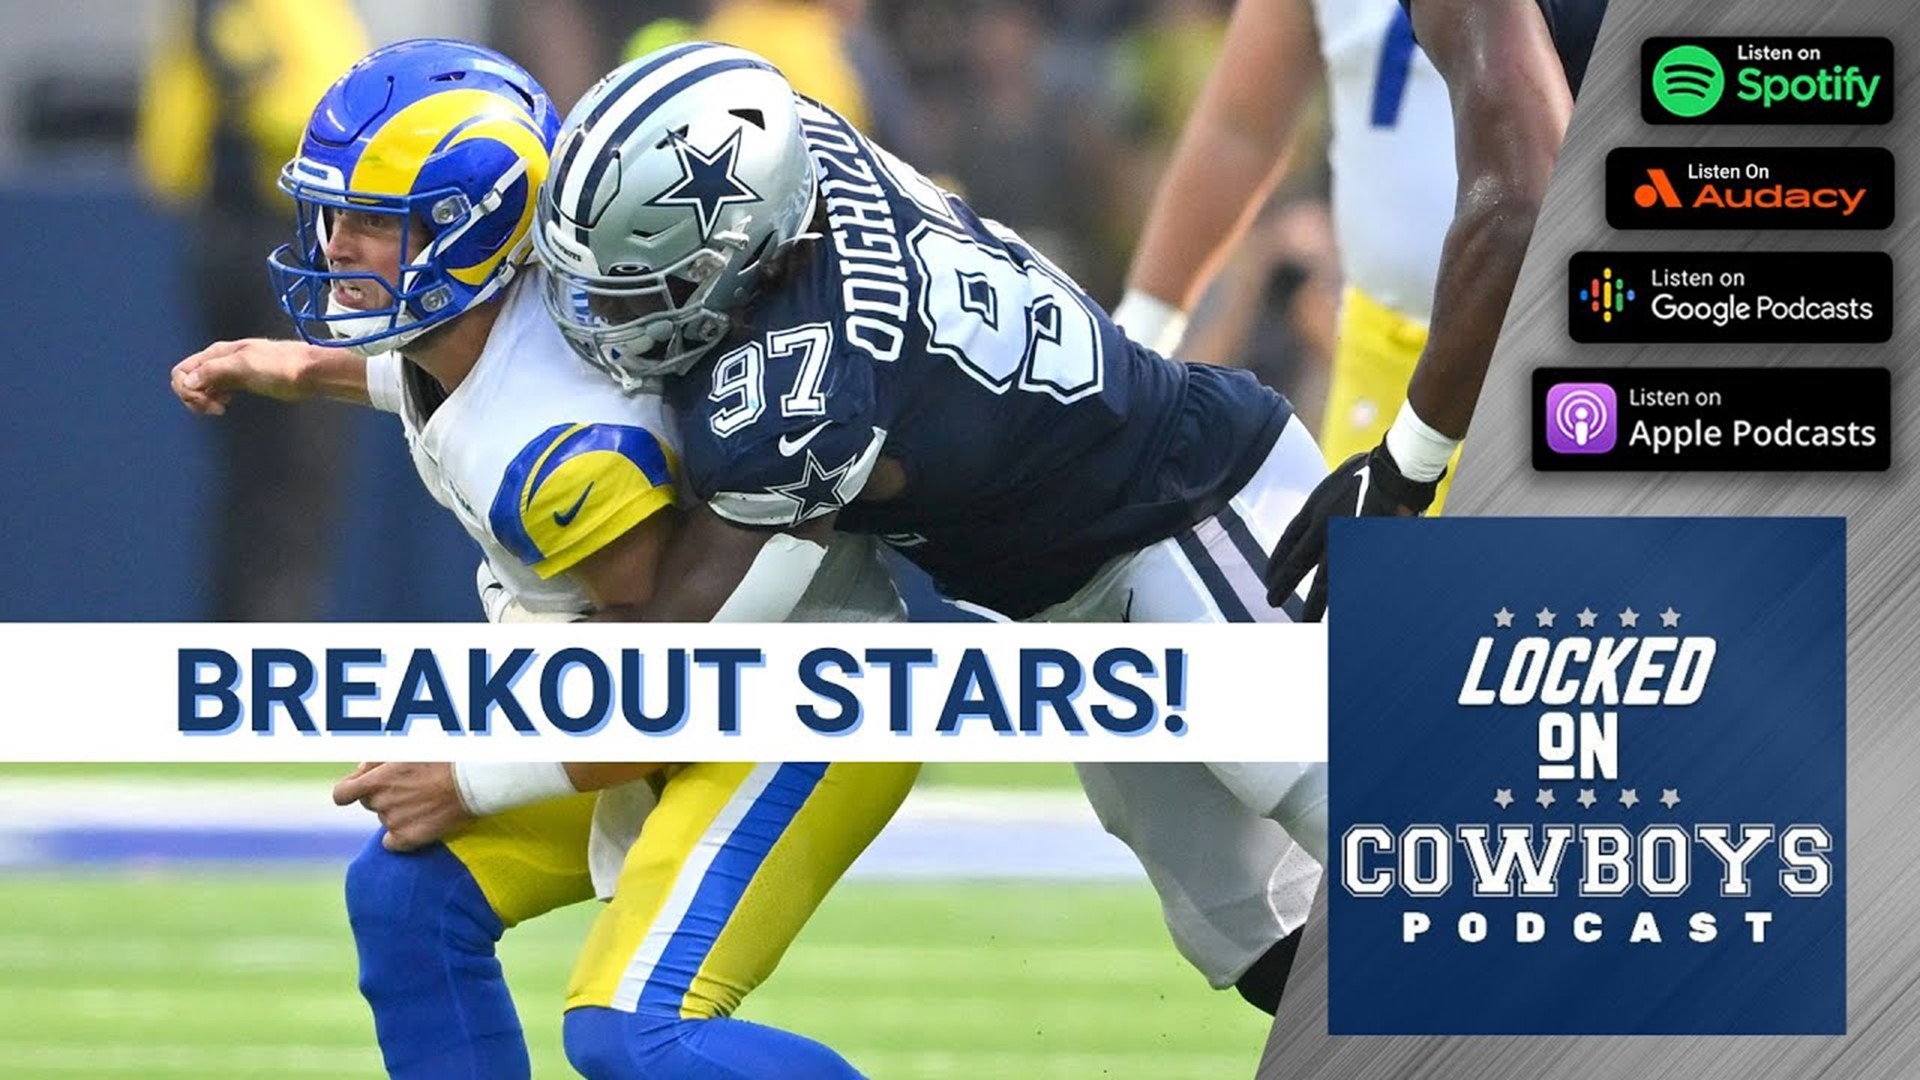 Marcus Mosher and Landon McCool of Locked On Cowboys discuss the breakout players on defense for the Dallas Cowboys.